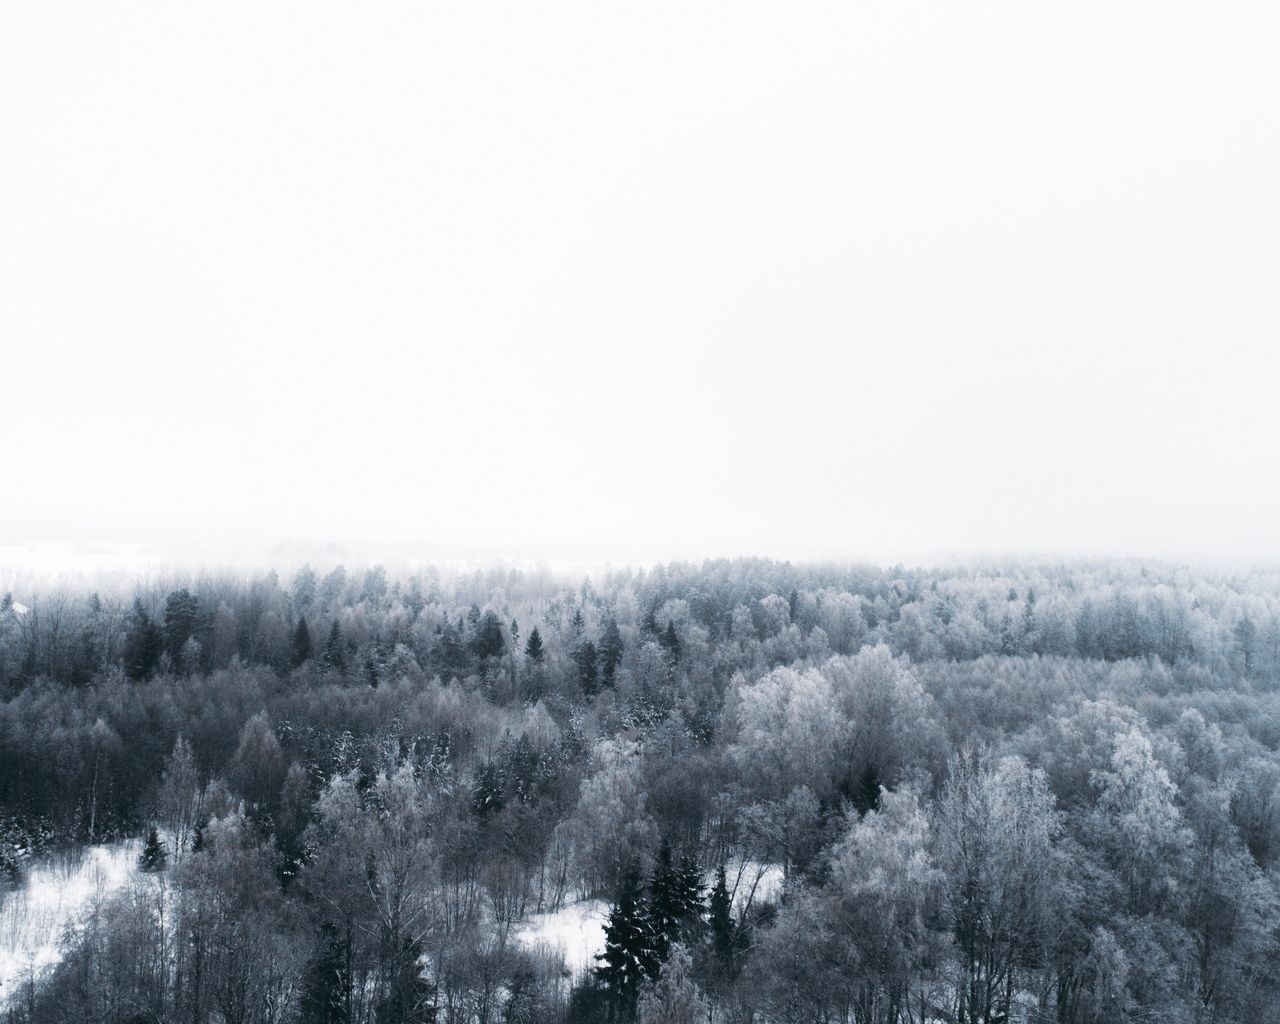 Download wallpaper 1280x1024 winter, trees, aerial view, minimalism, white standard 5:4 HD background